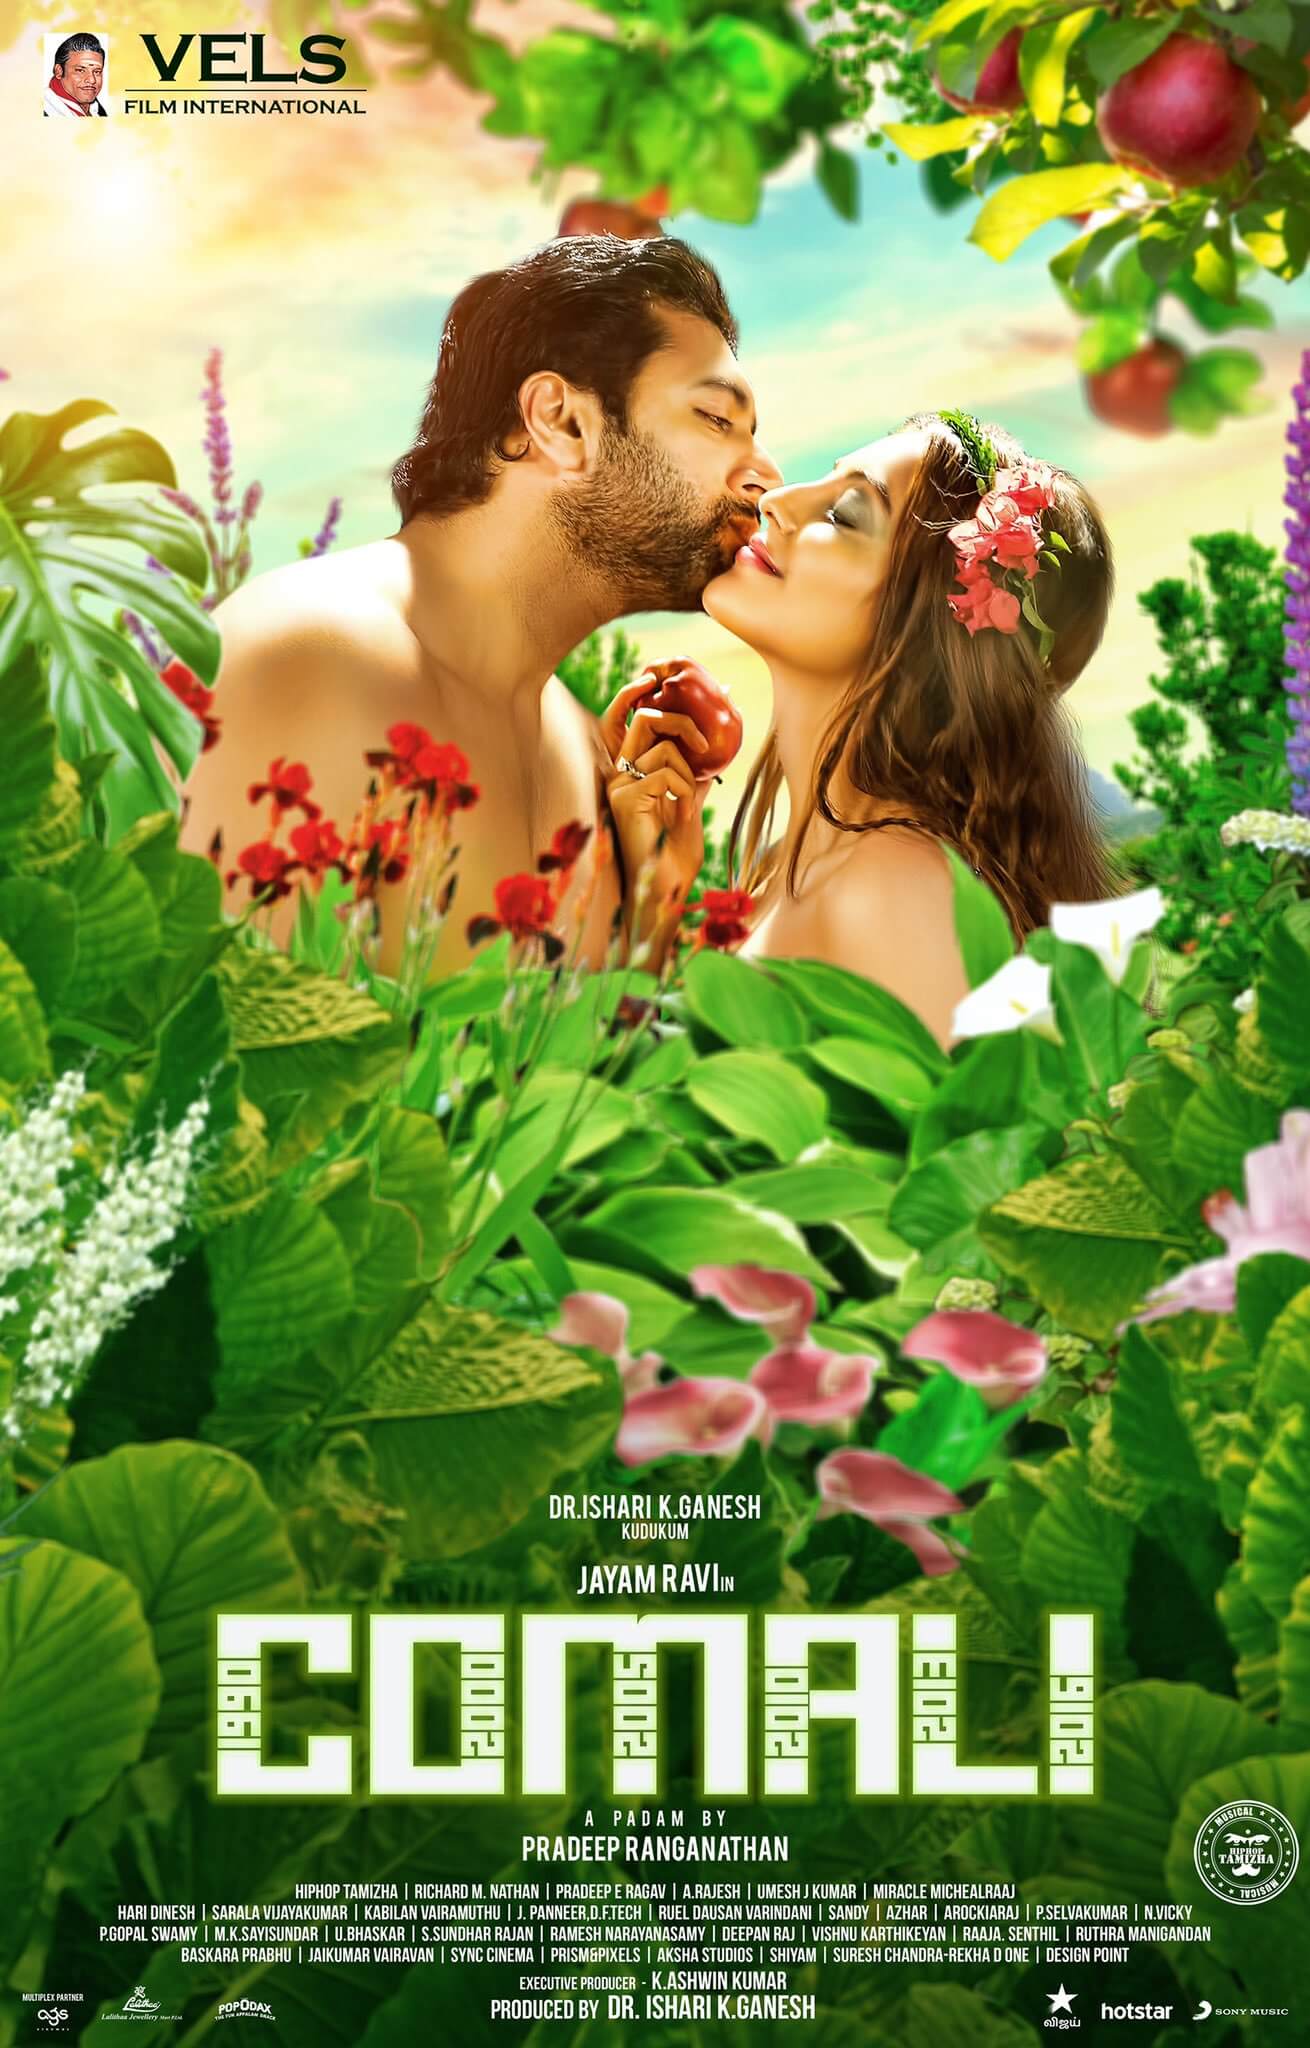 Comali (film) every reviews and ratings